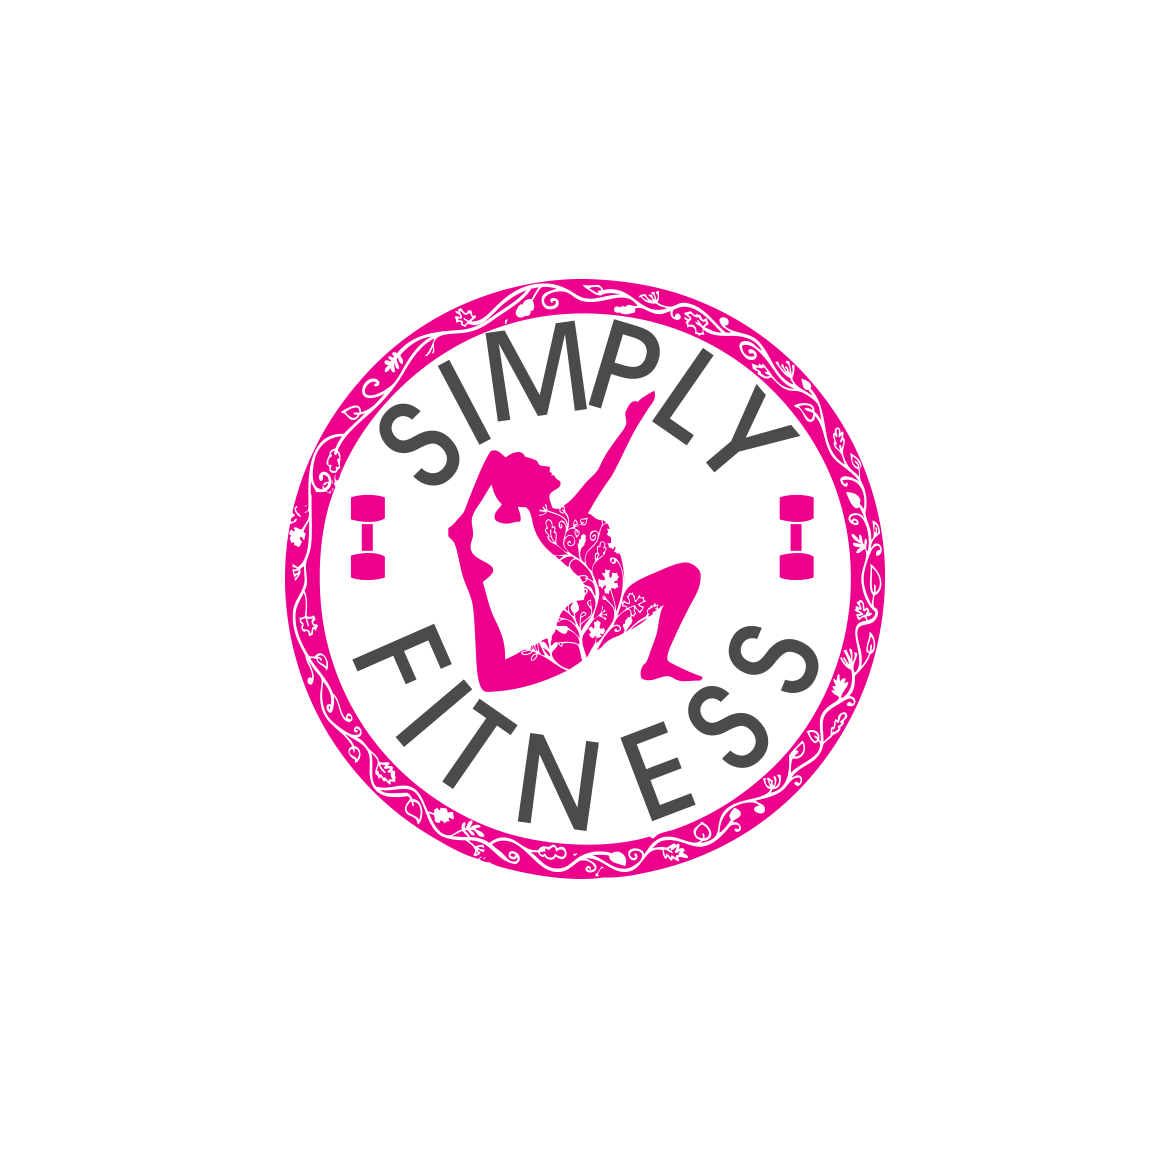 Simply Fitness - Erica Weddle